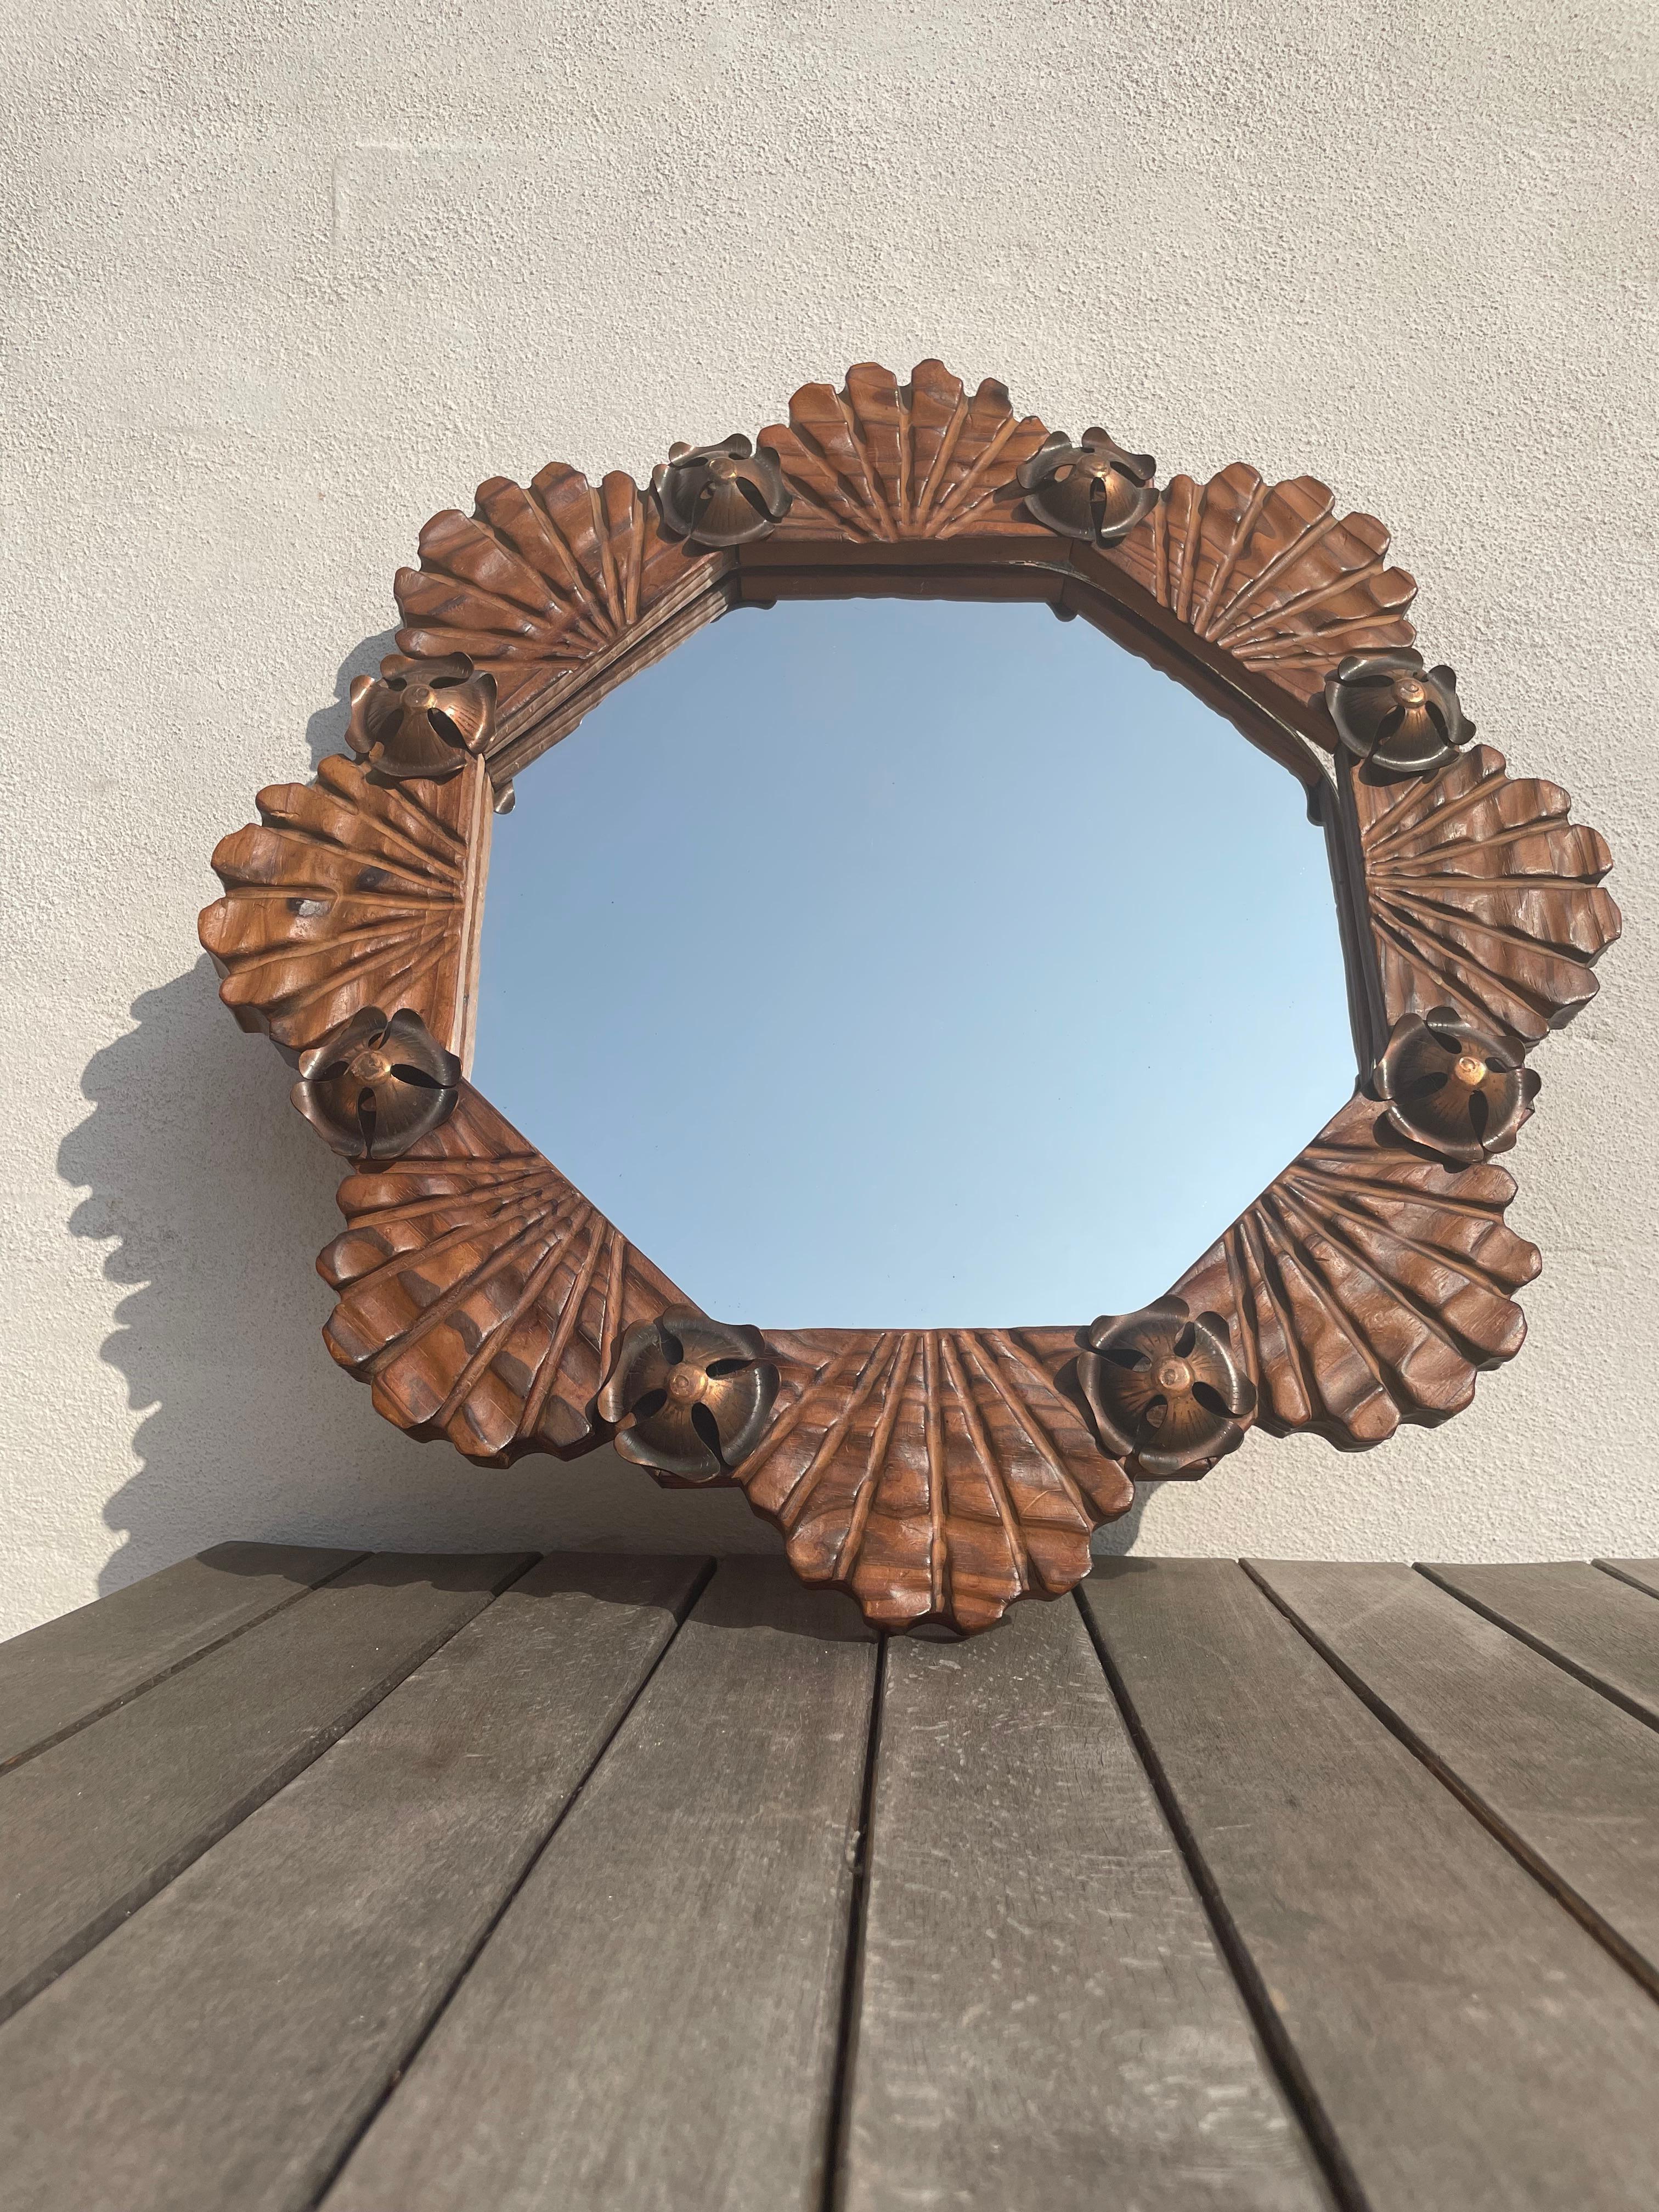 Early 1970s Spanish midcentury modern brutalist lacquered wooden wall mirror with brass floral decor and hand-carved organic lined structure and textured appearance. Date stamped on mirror and original label on back. Beautiful vintage condition.